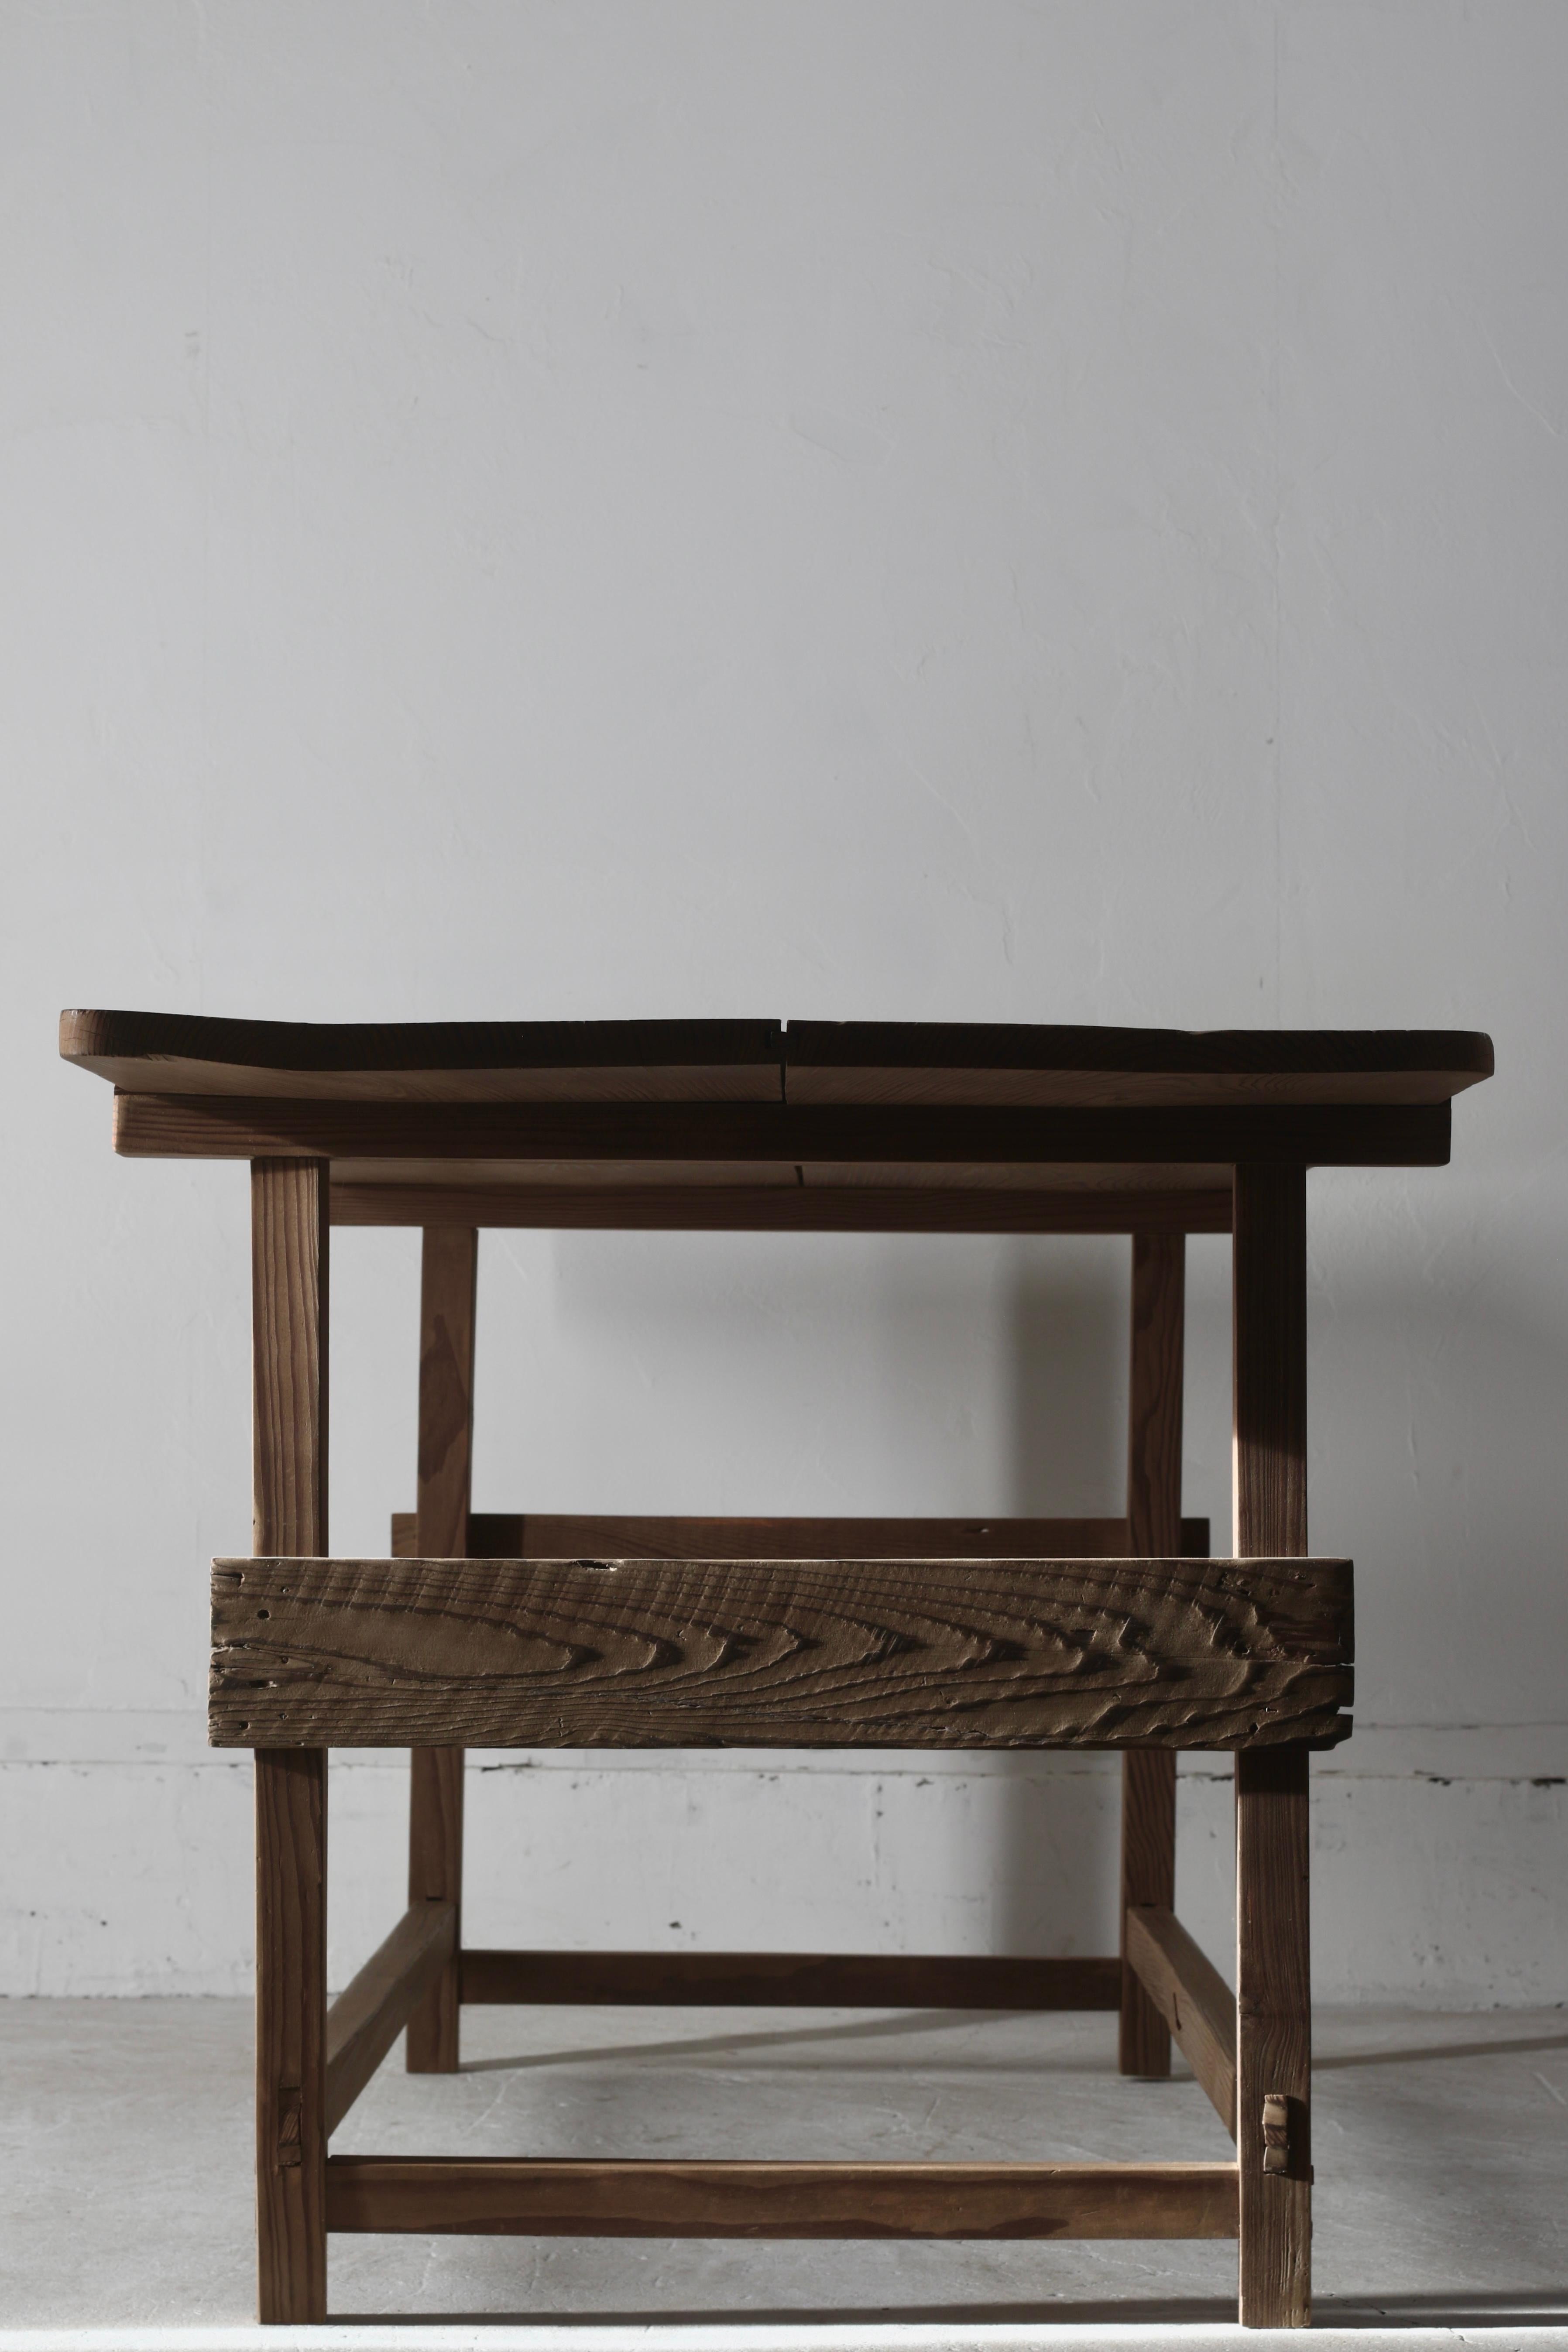 It's an old table in Japan.

Cedar and pine are used for the materials.

It seems that it was made in a private house in the Tohoku region around the early Showa period.

Although it is a simple design, the Kumite part is assembled with a